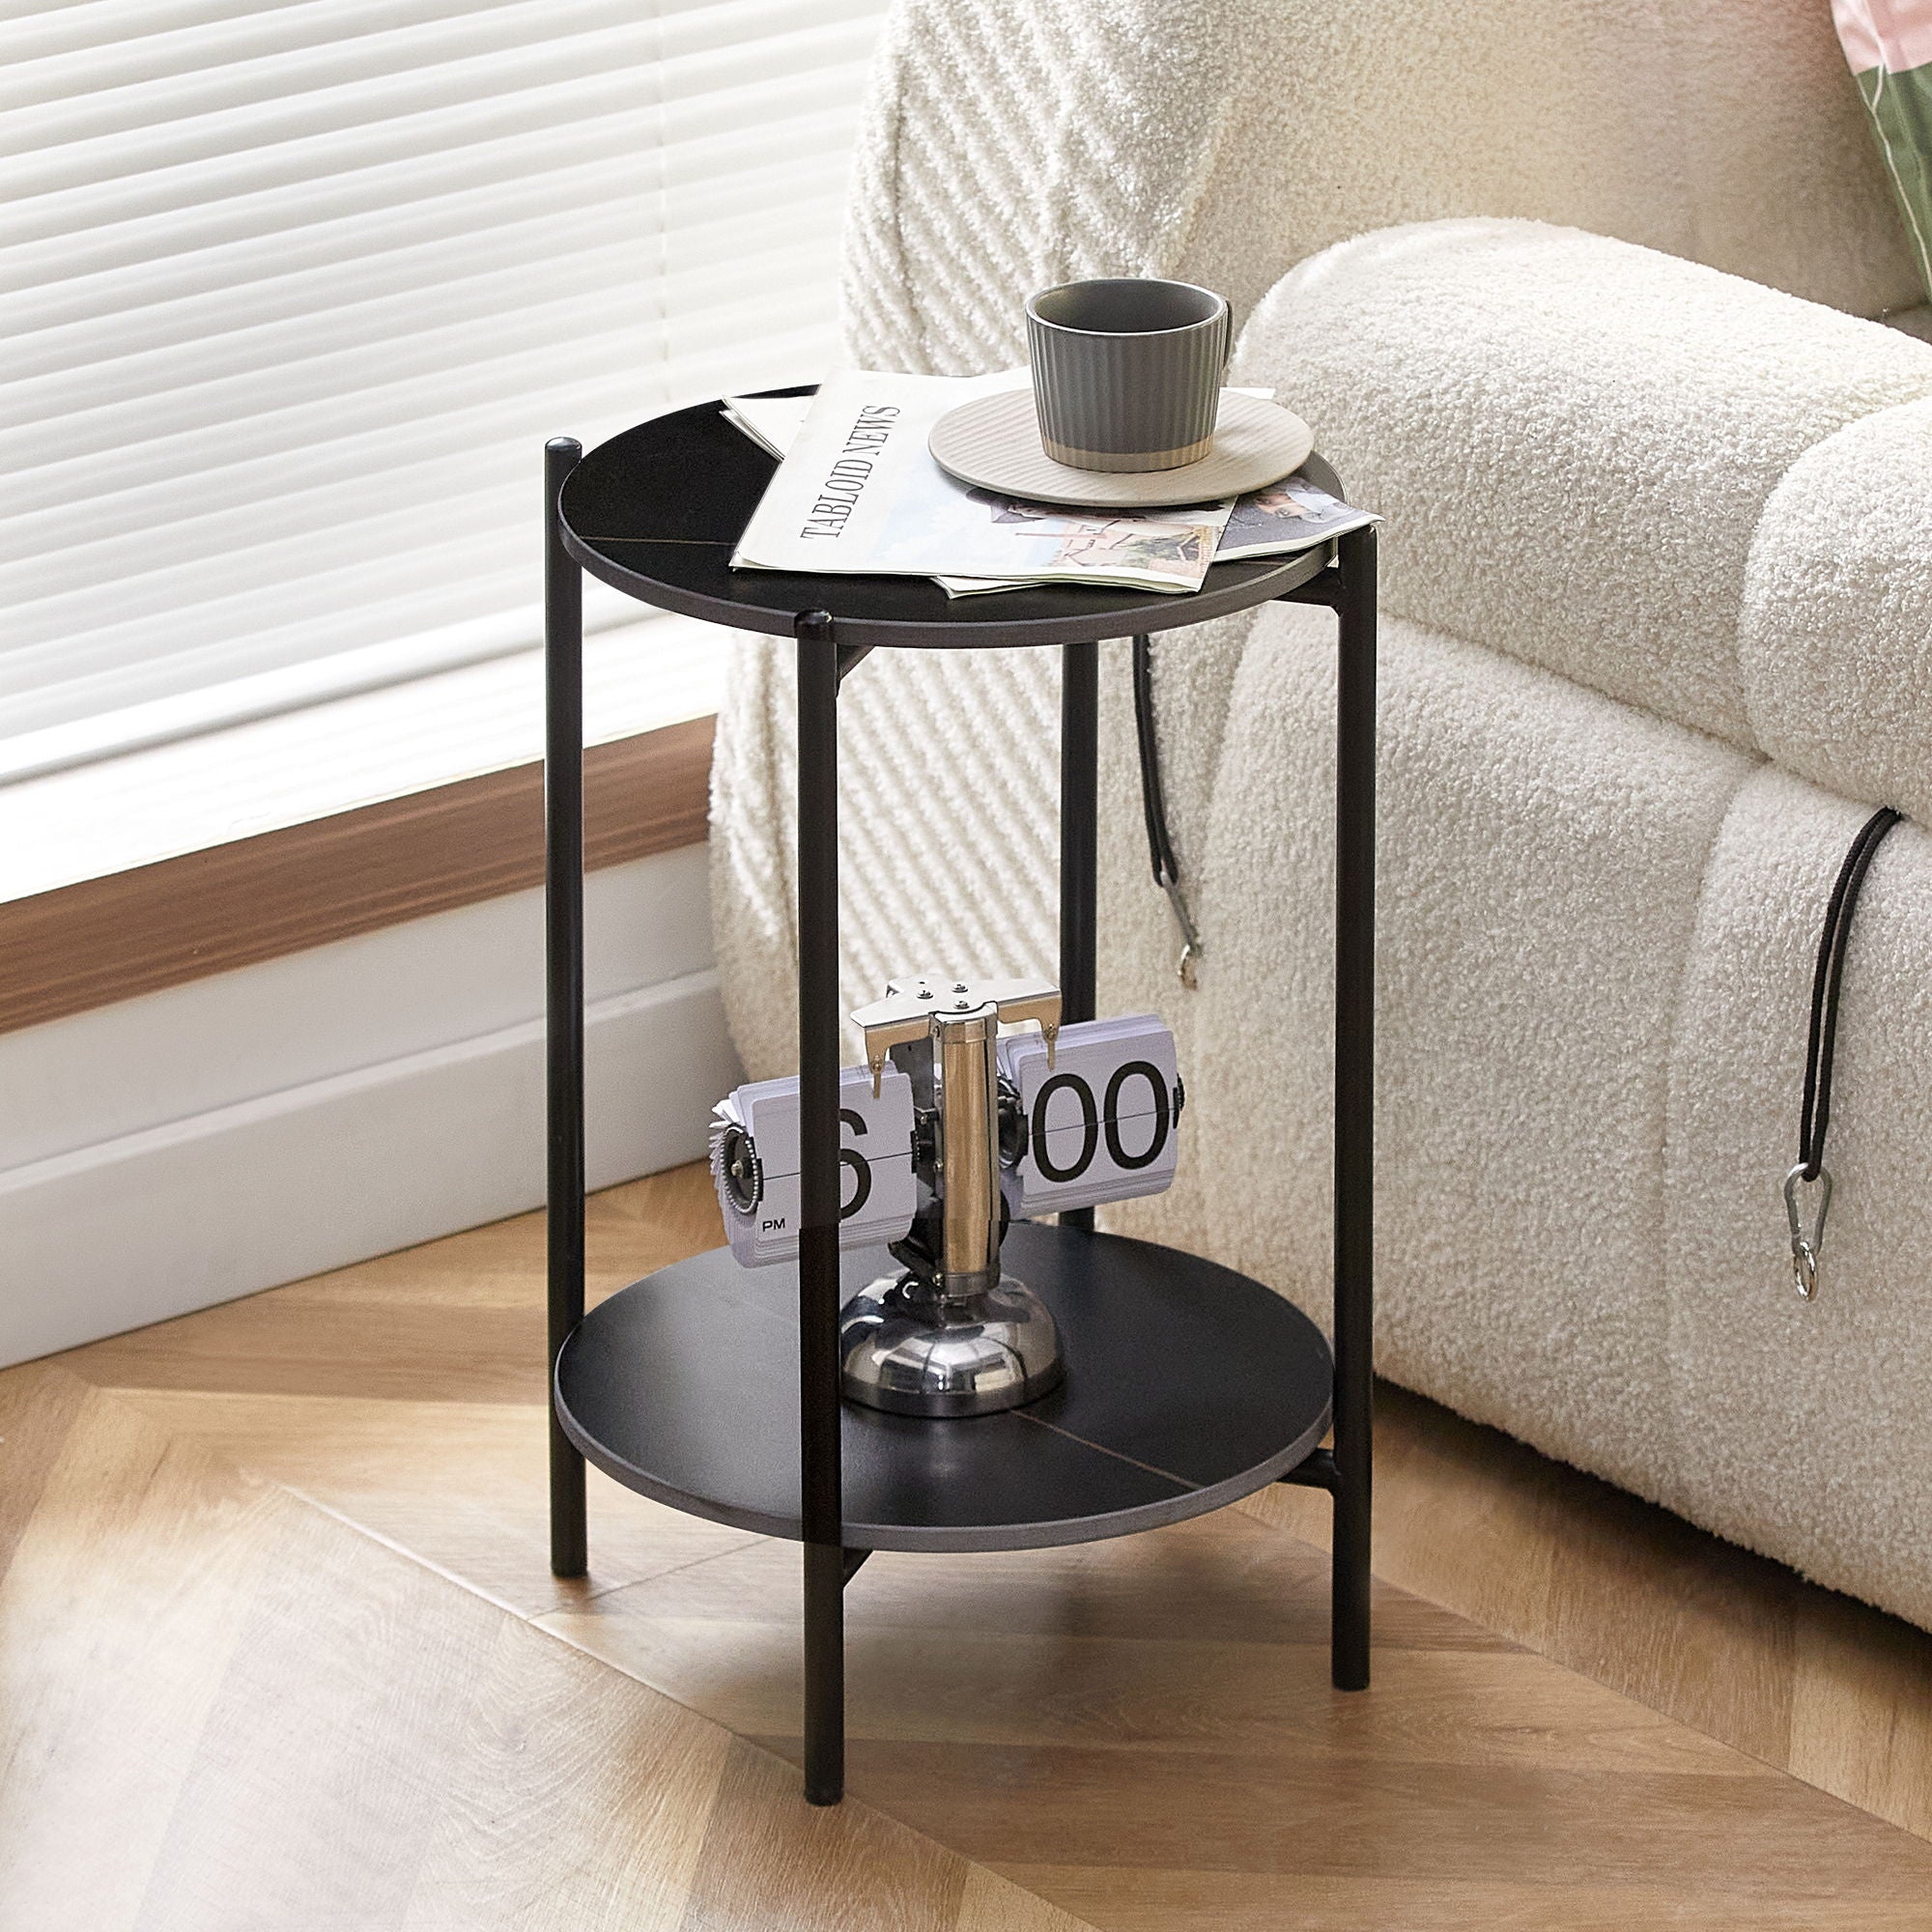 2 - Layer End Table With Whole Marble Tabletop, Round Coffee Table With Black Metal Frame For Bedroom Living Room Office Black